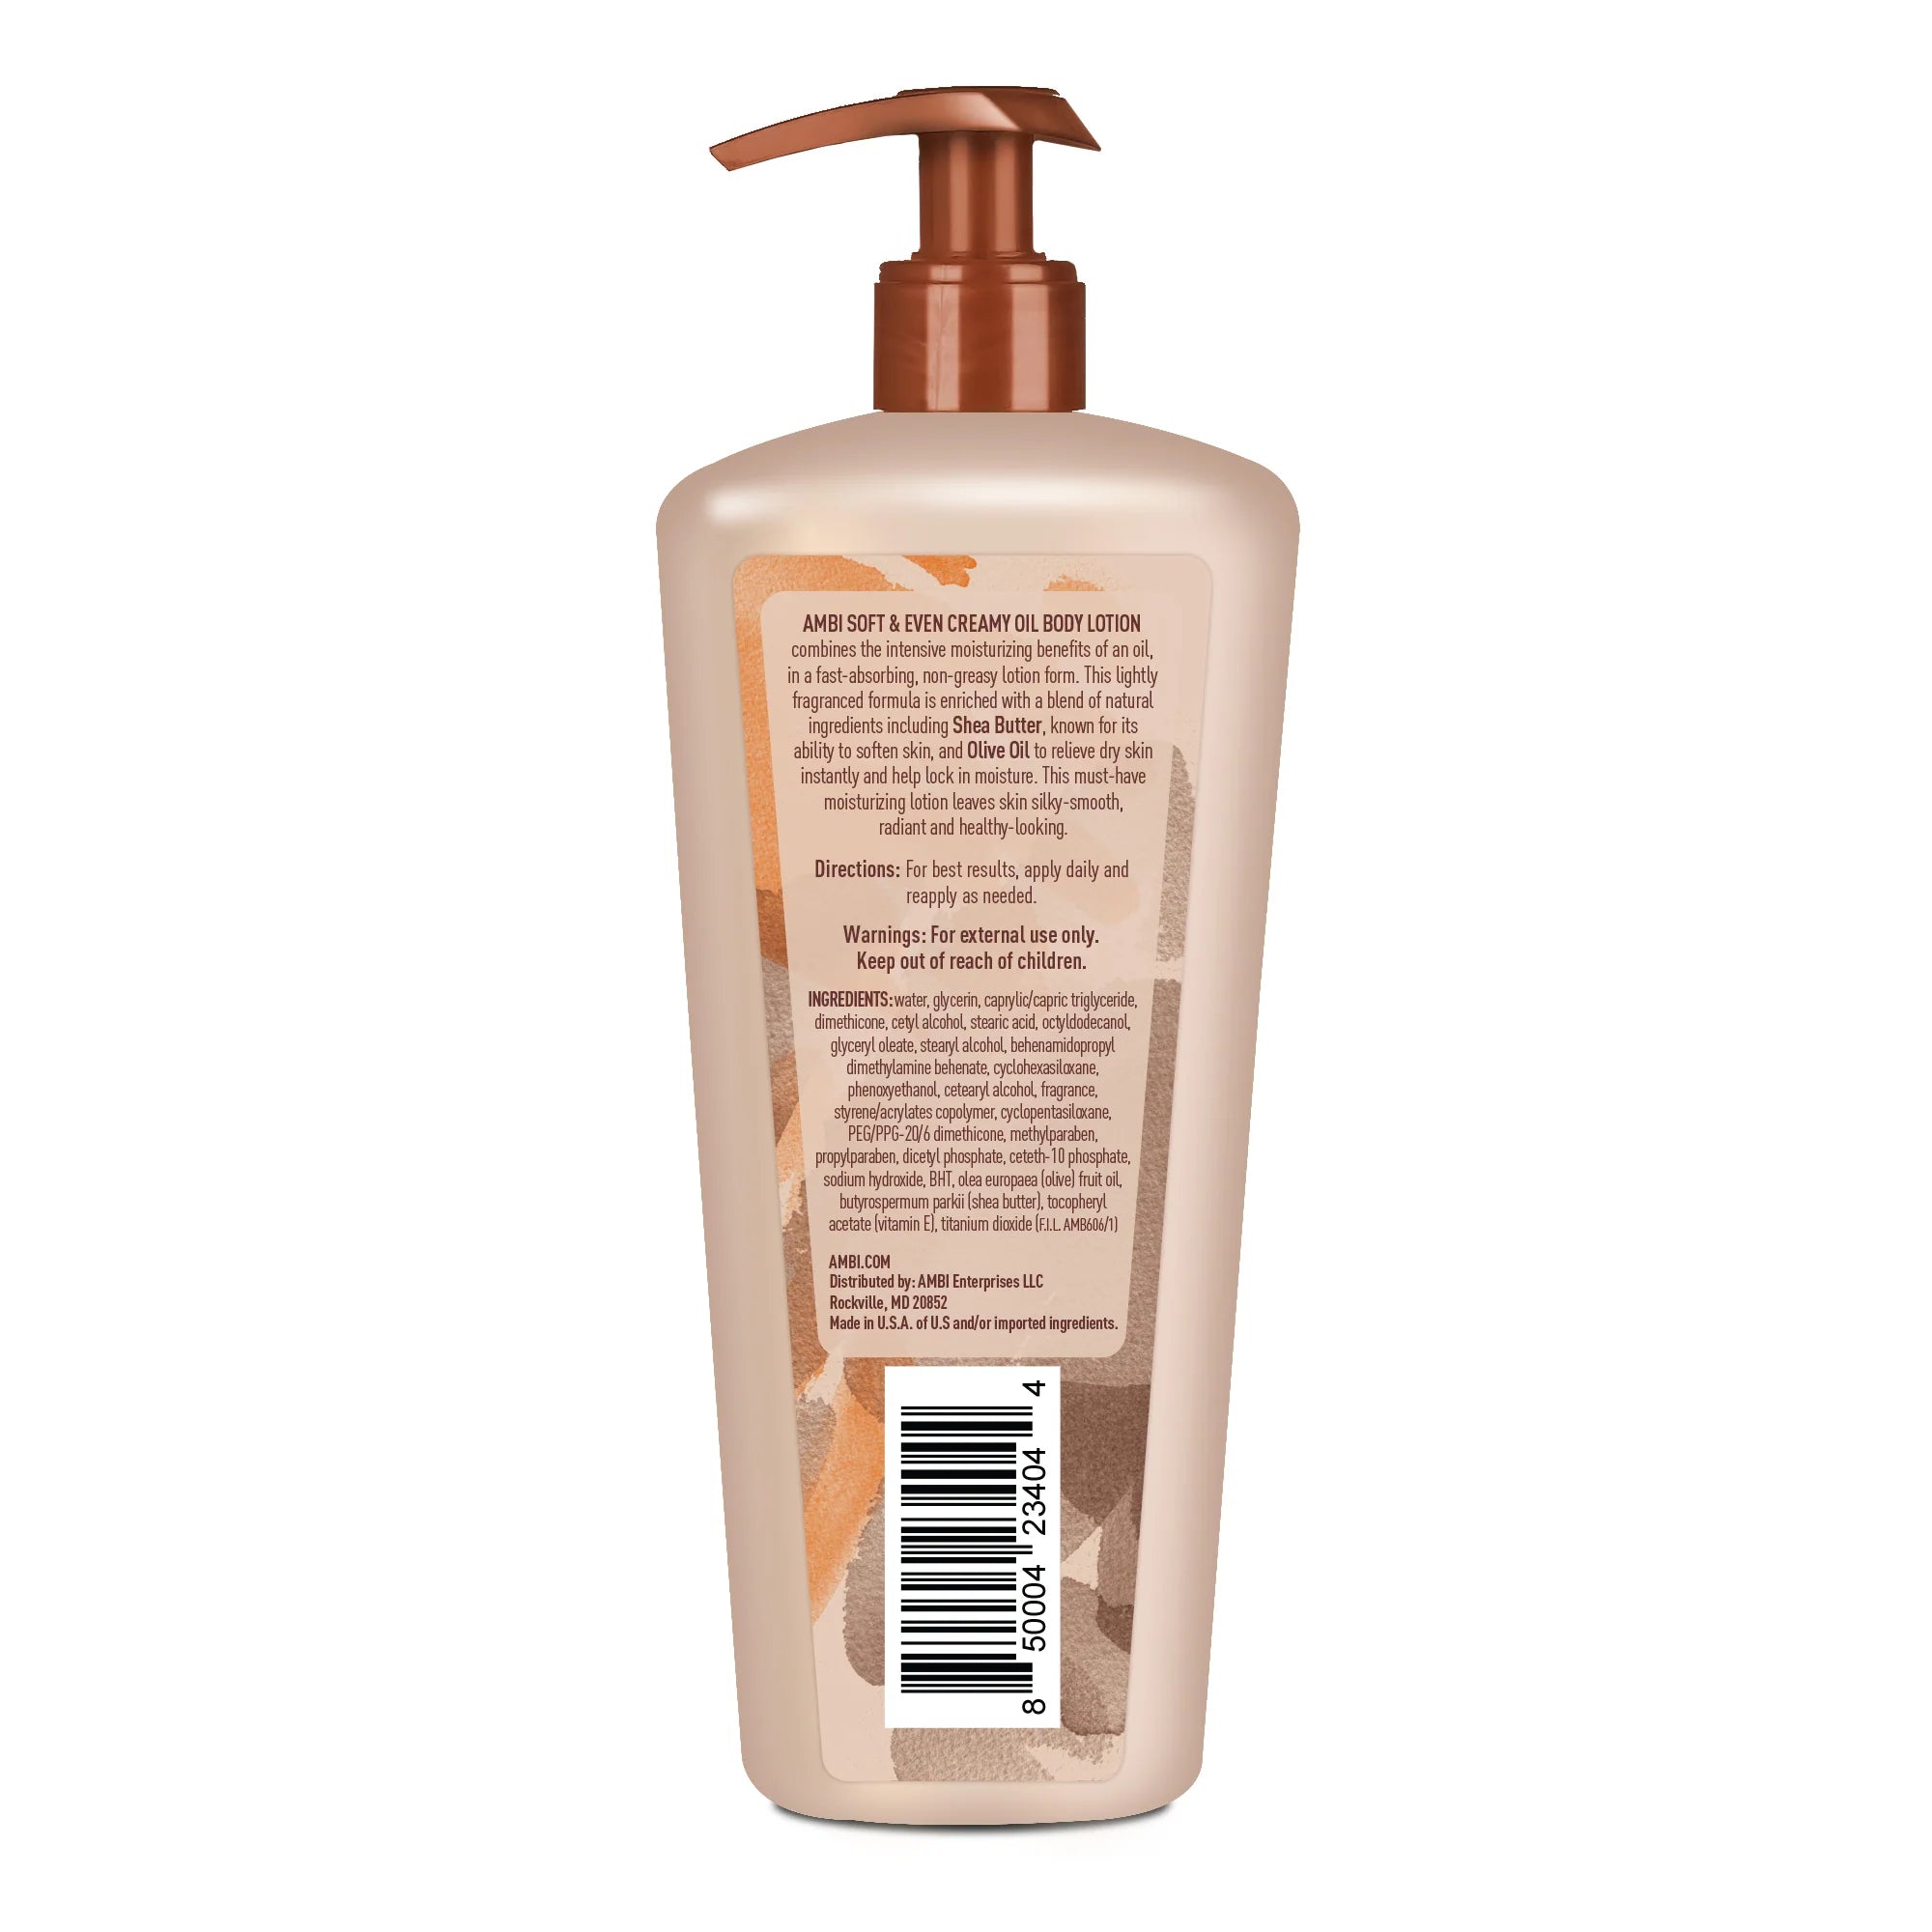 Ambi Soft And Even Lotion 12oz